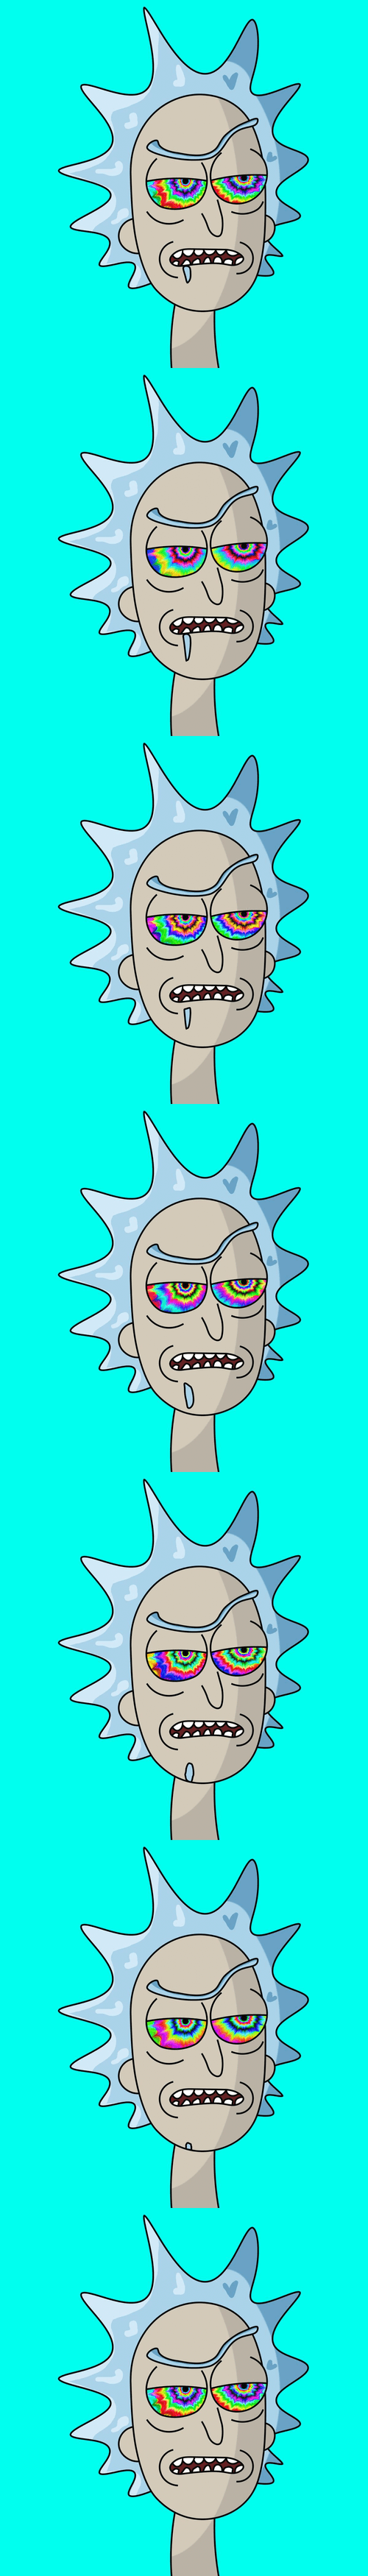 Stoned Rick picture